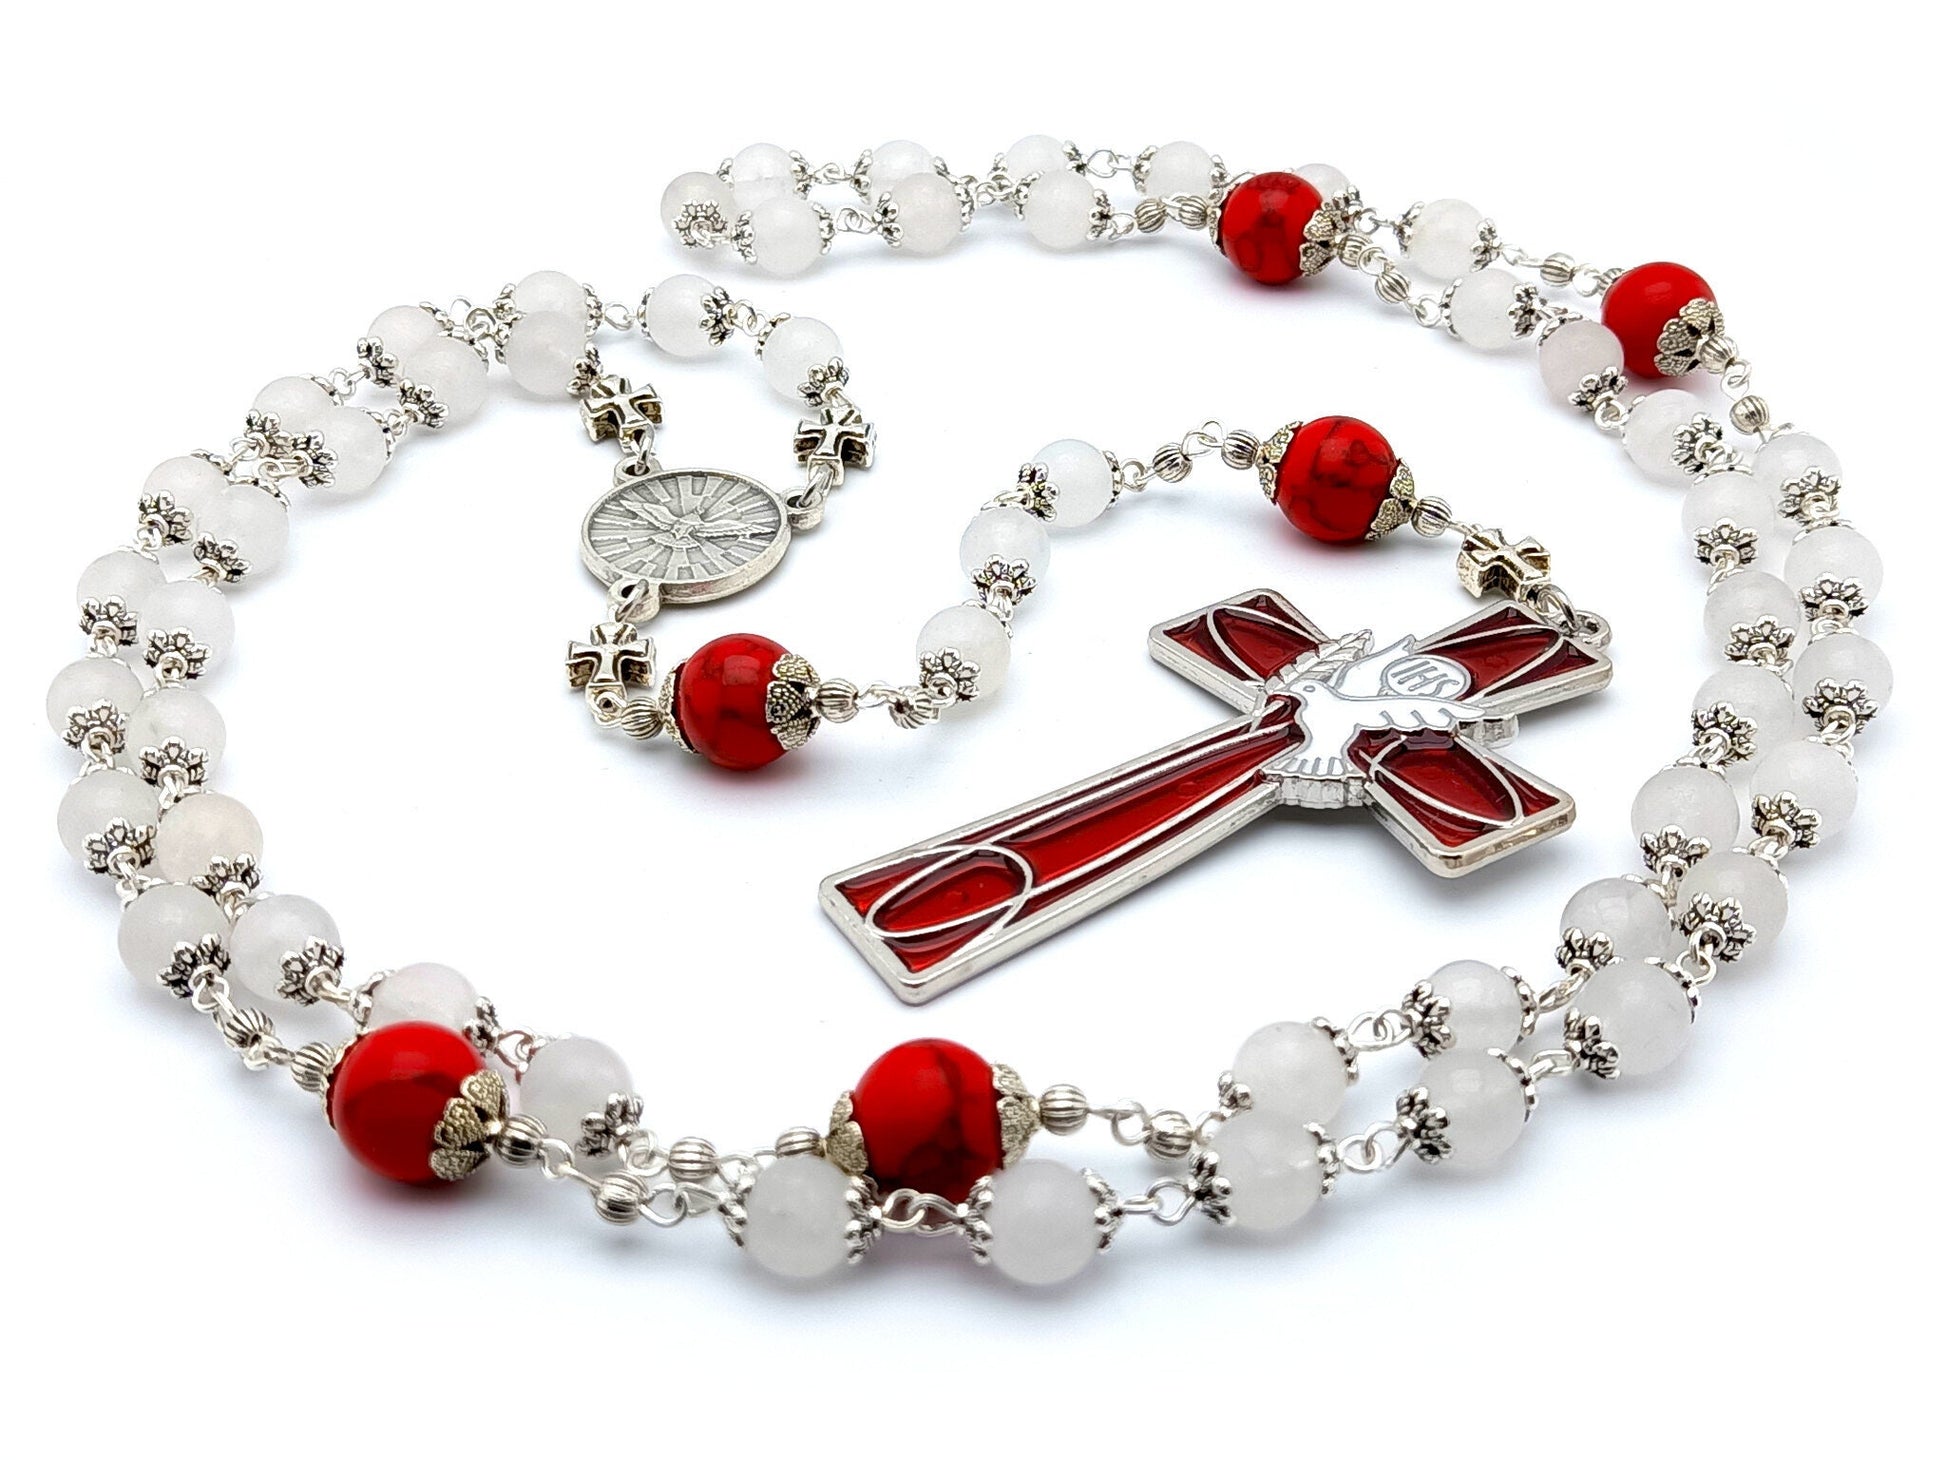 Holy Spirit unique rosary beads with red and white gemstone beads, red and white enamel cross and Holy Spirit silver centre medal.